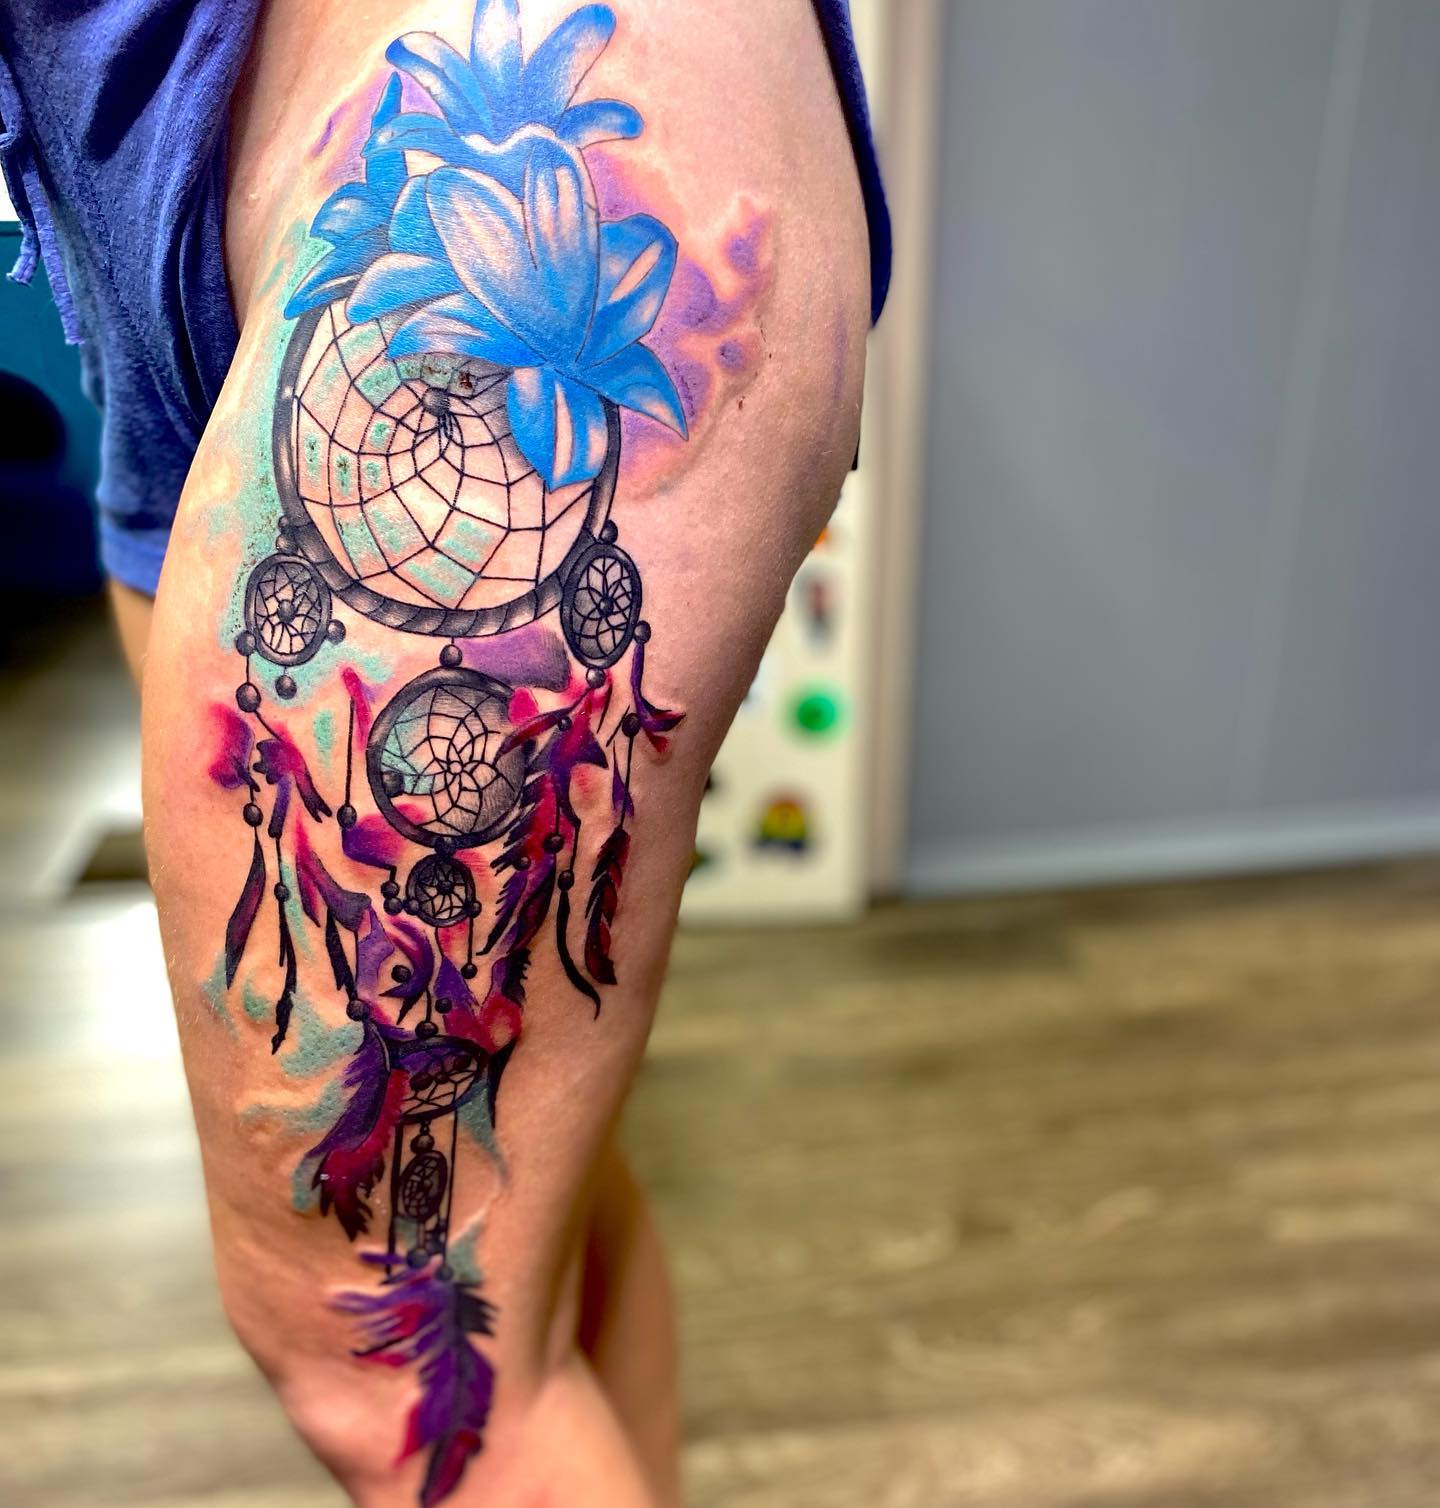 When you were little, you probably had a dream catcher hanging over your bed. It was probably covered in glow-in-the-dark stars and planets, and maybe even had some unicorns or fairies painted on it as well. Now it is time to see this beauty on your leg!